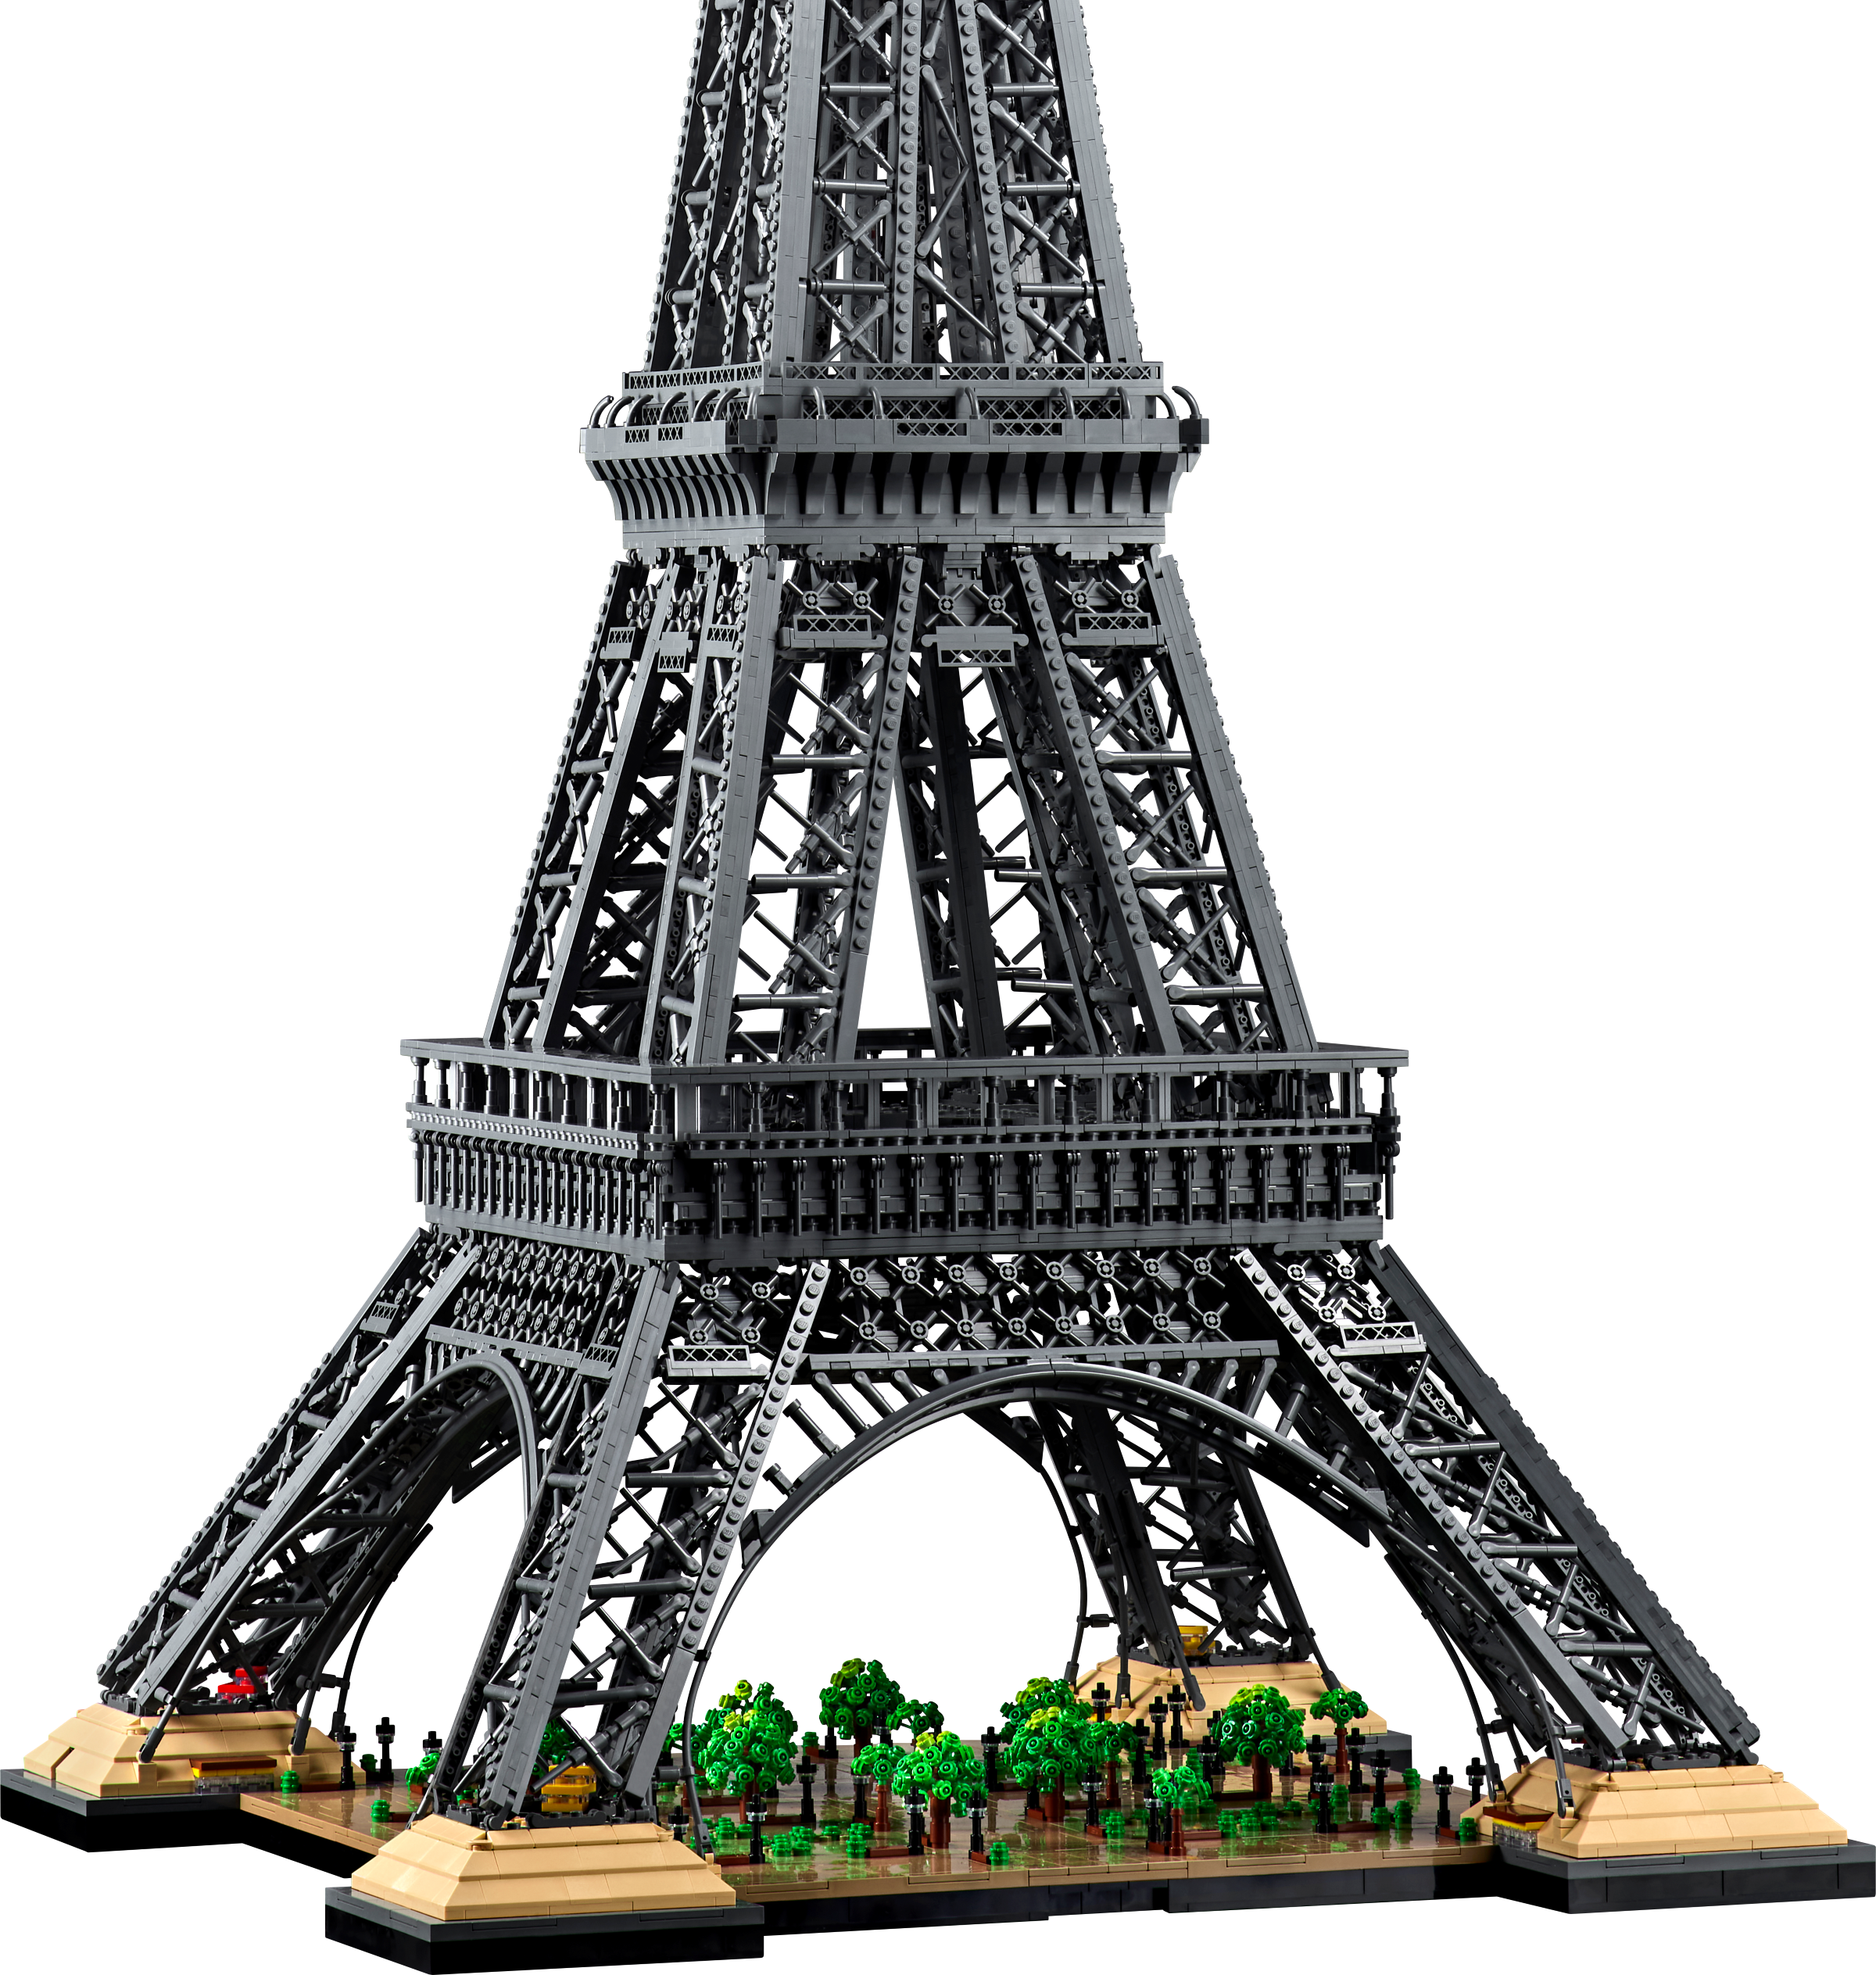 Eiffel tower 10307 | LEGO® Icons Buy online at the Official LEGO® US